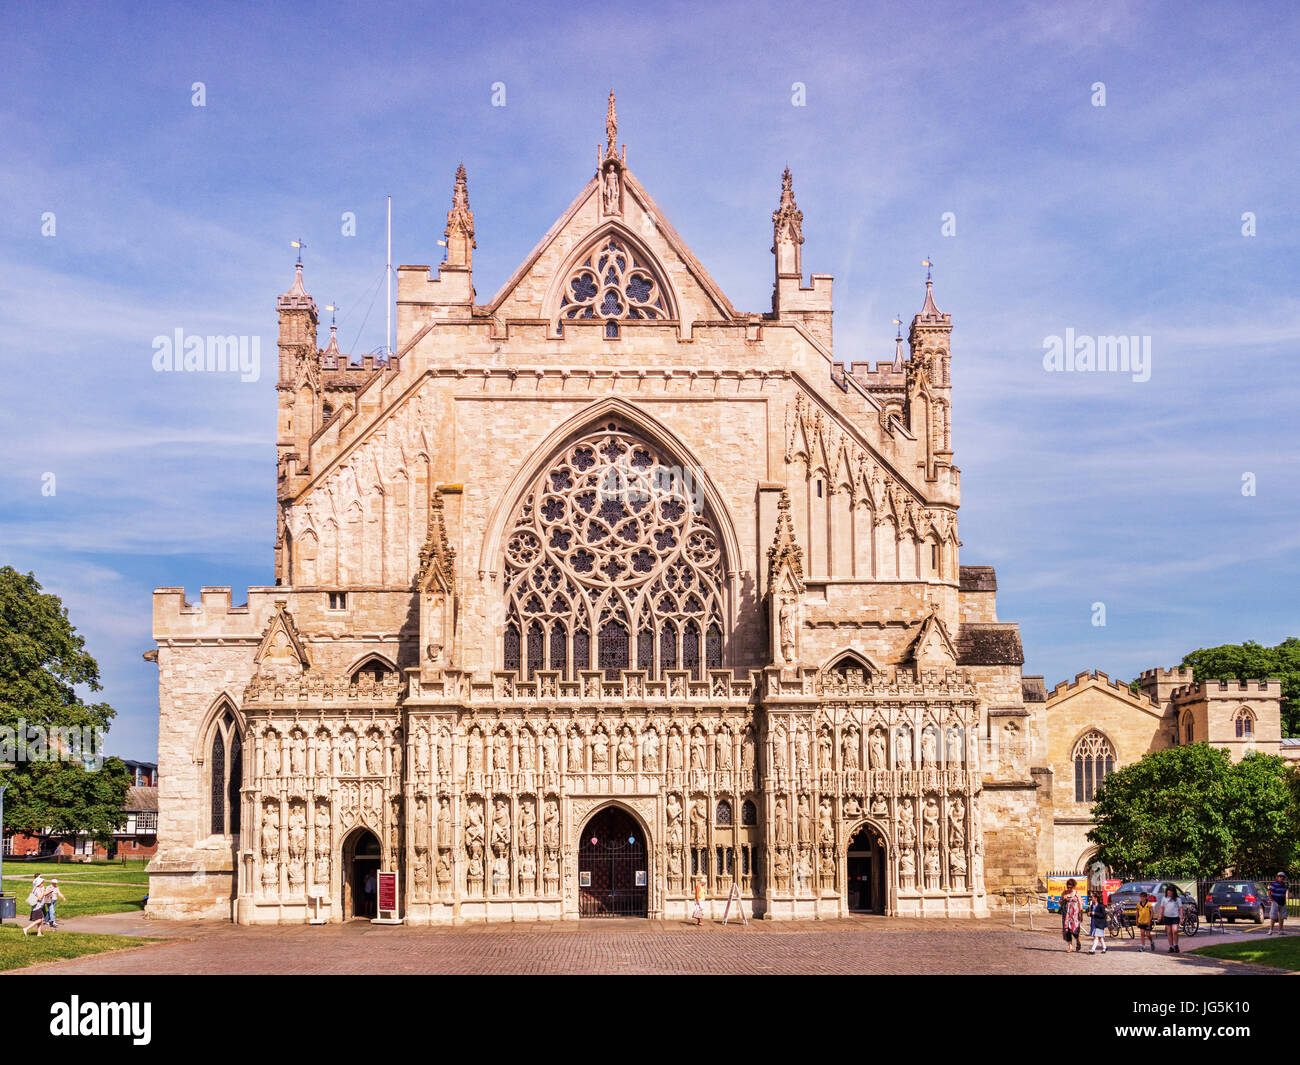 20 June 2017: Exeter, Devon, England, UK - The West side of Exeter Cathedral on a fine summer day. Stock Photo